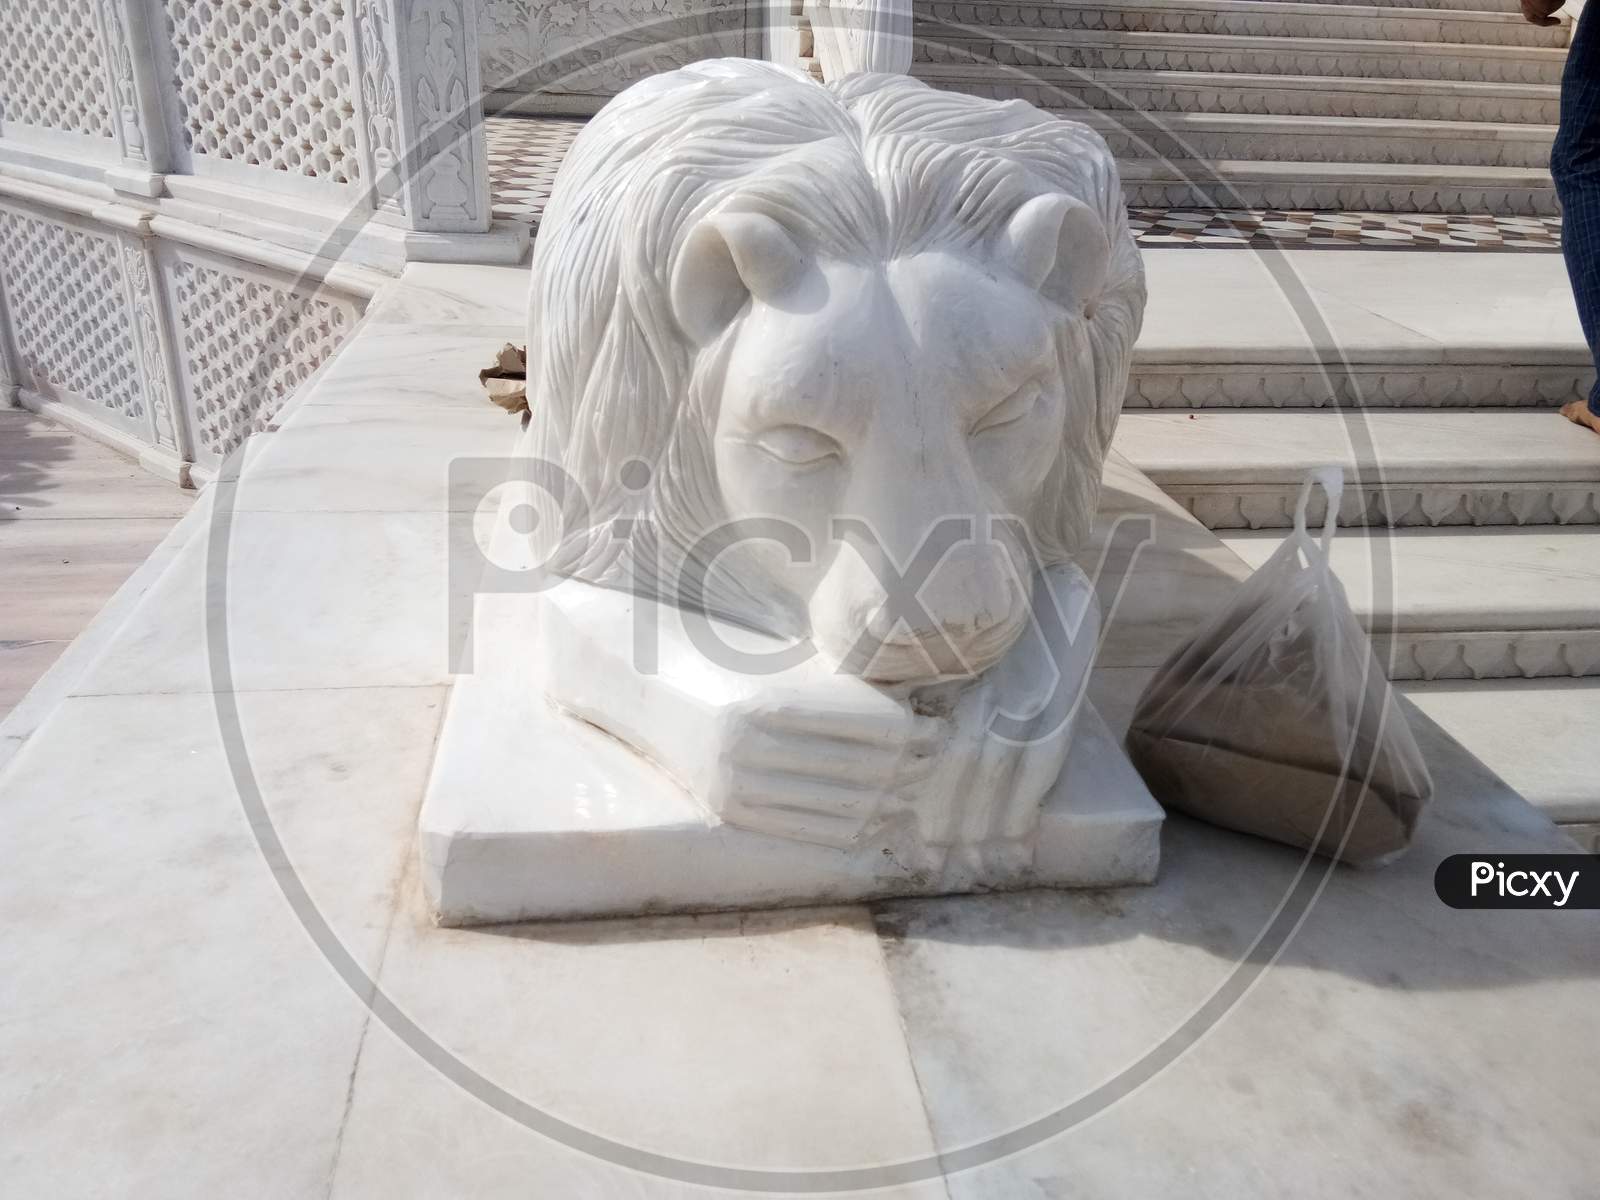 A statue of a sleeping lion on the main door of Karni Mata temple in Rajasthan